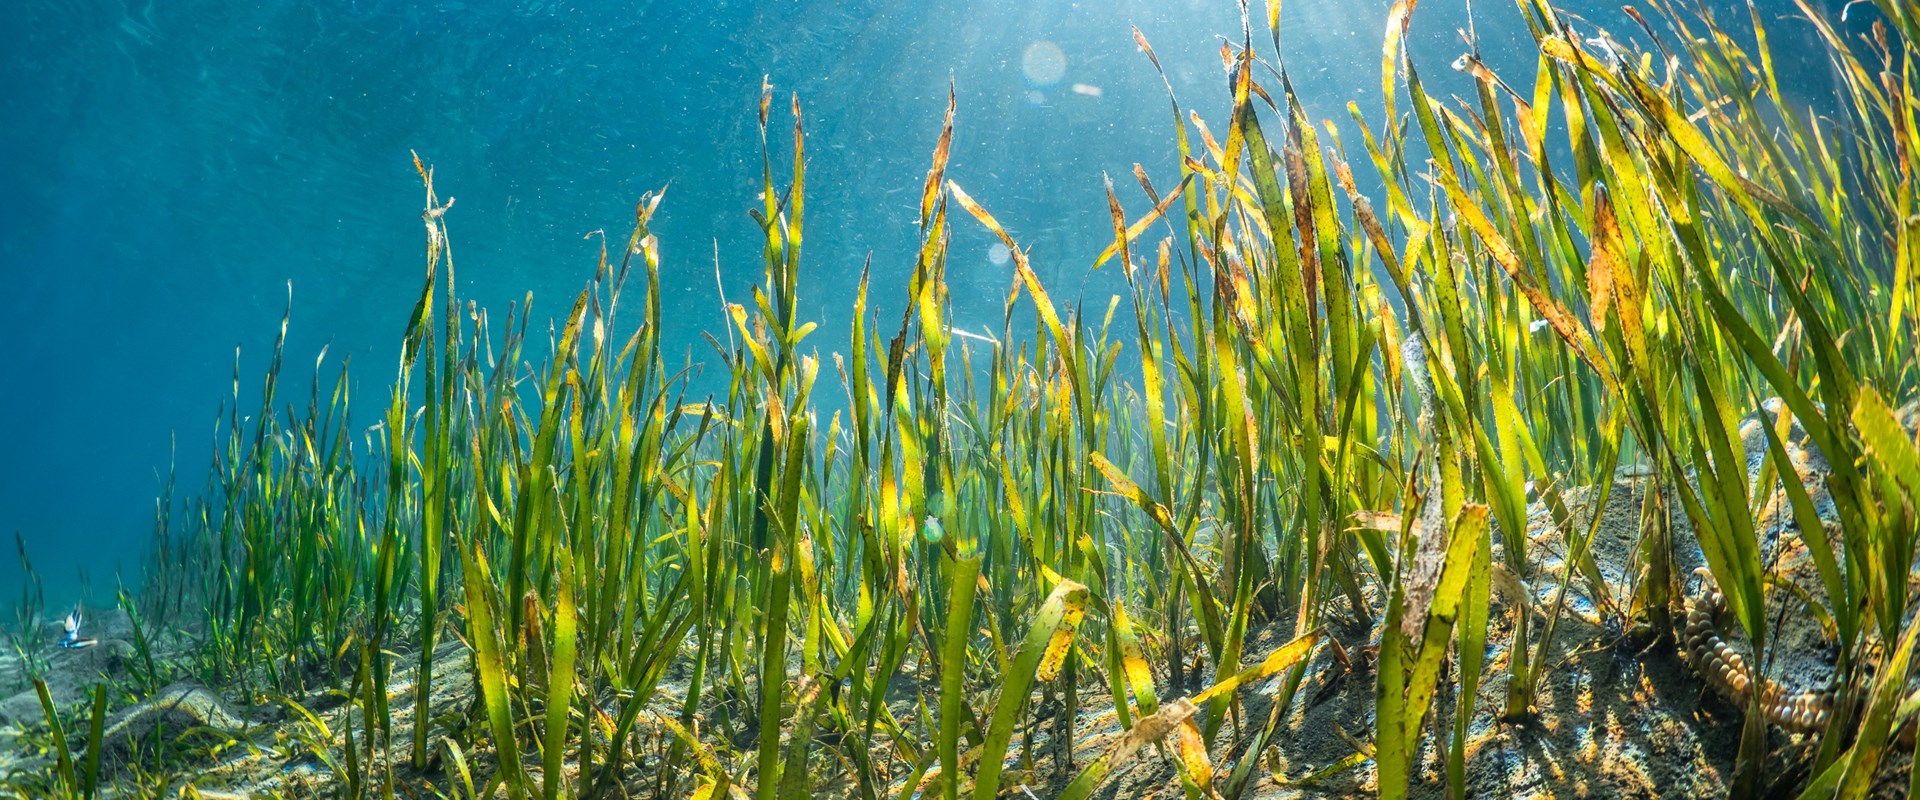 Seagrass: More than Meets the Eye » Marine Conservation Institute